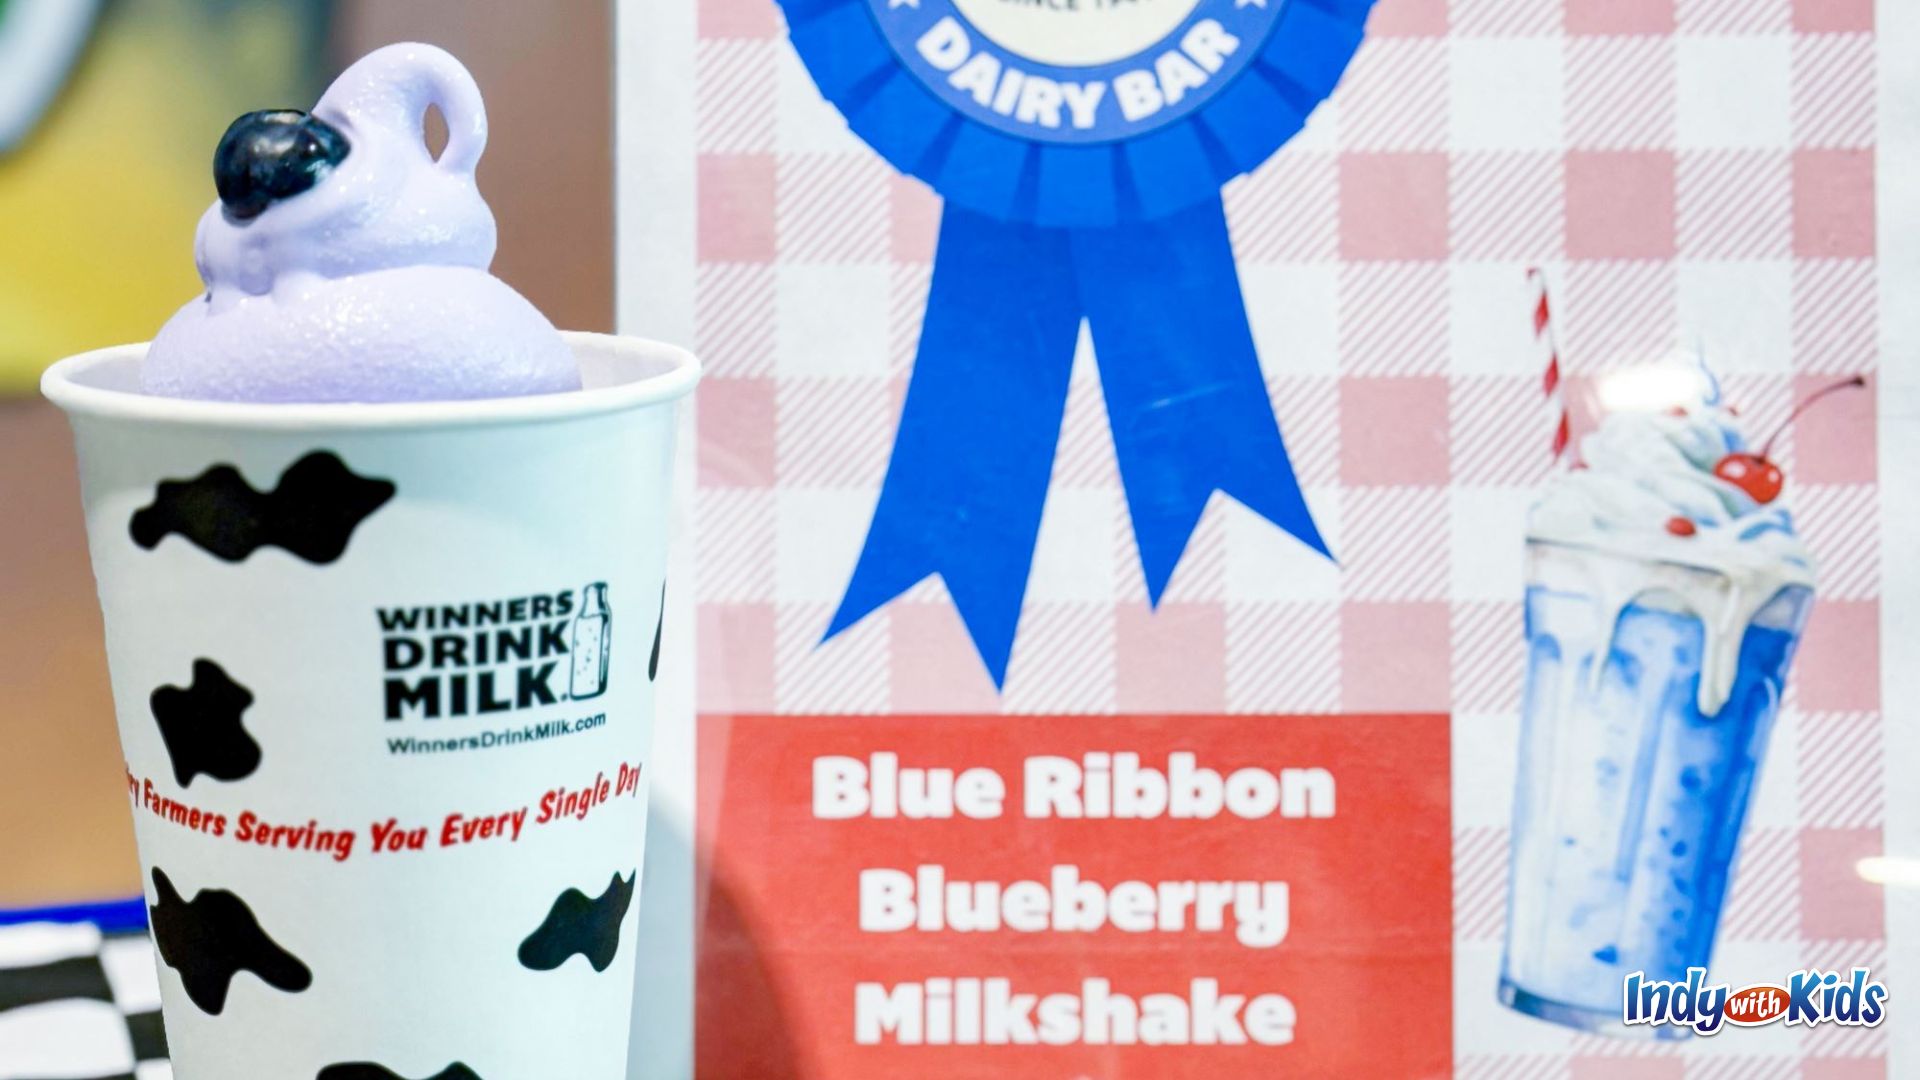 Indiana State Fair Food: The Dairy Bar's signature blueberry milkshake is served in a cow-spotted cup.